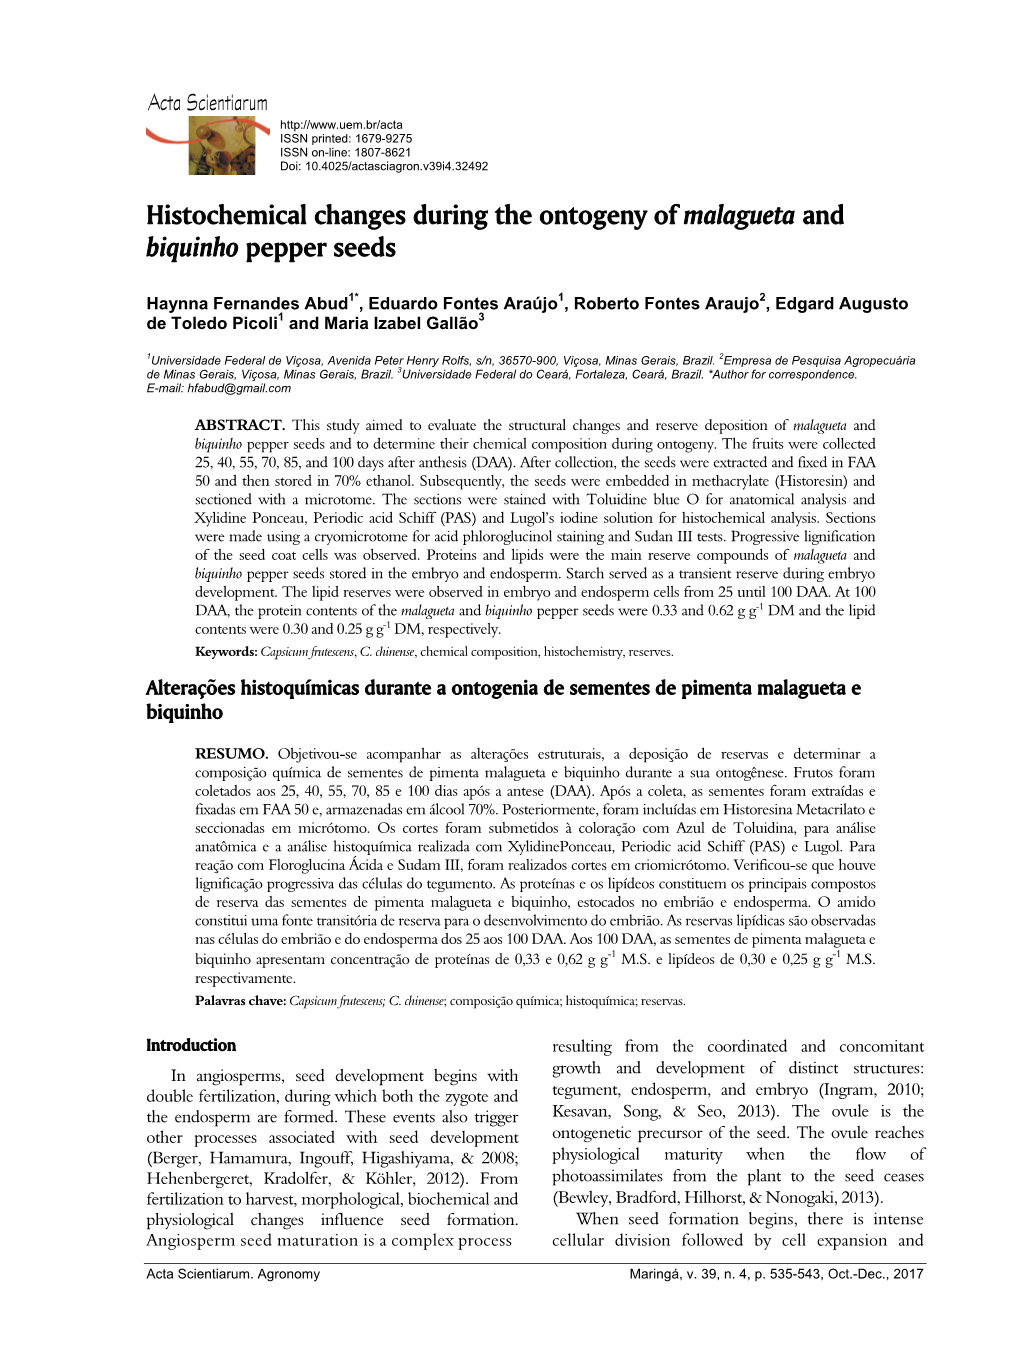 Histochemical Changes During the Ontogeny of Malagueta and Biquinho Pepper Seeds